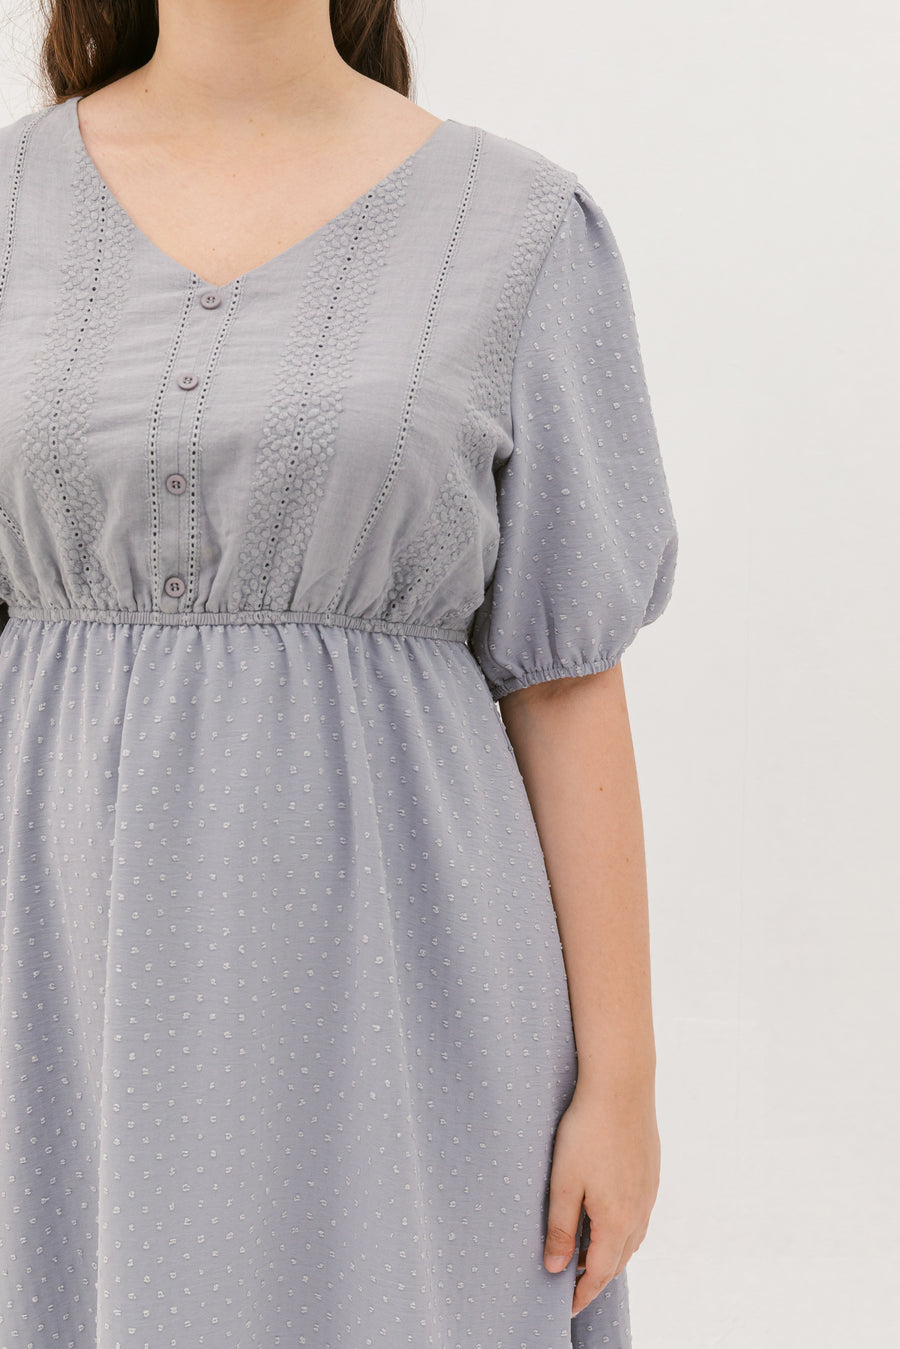 Chloe Embroidered Eyelet Dress In Grey